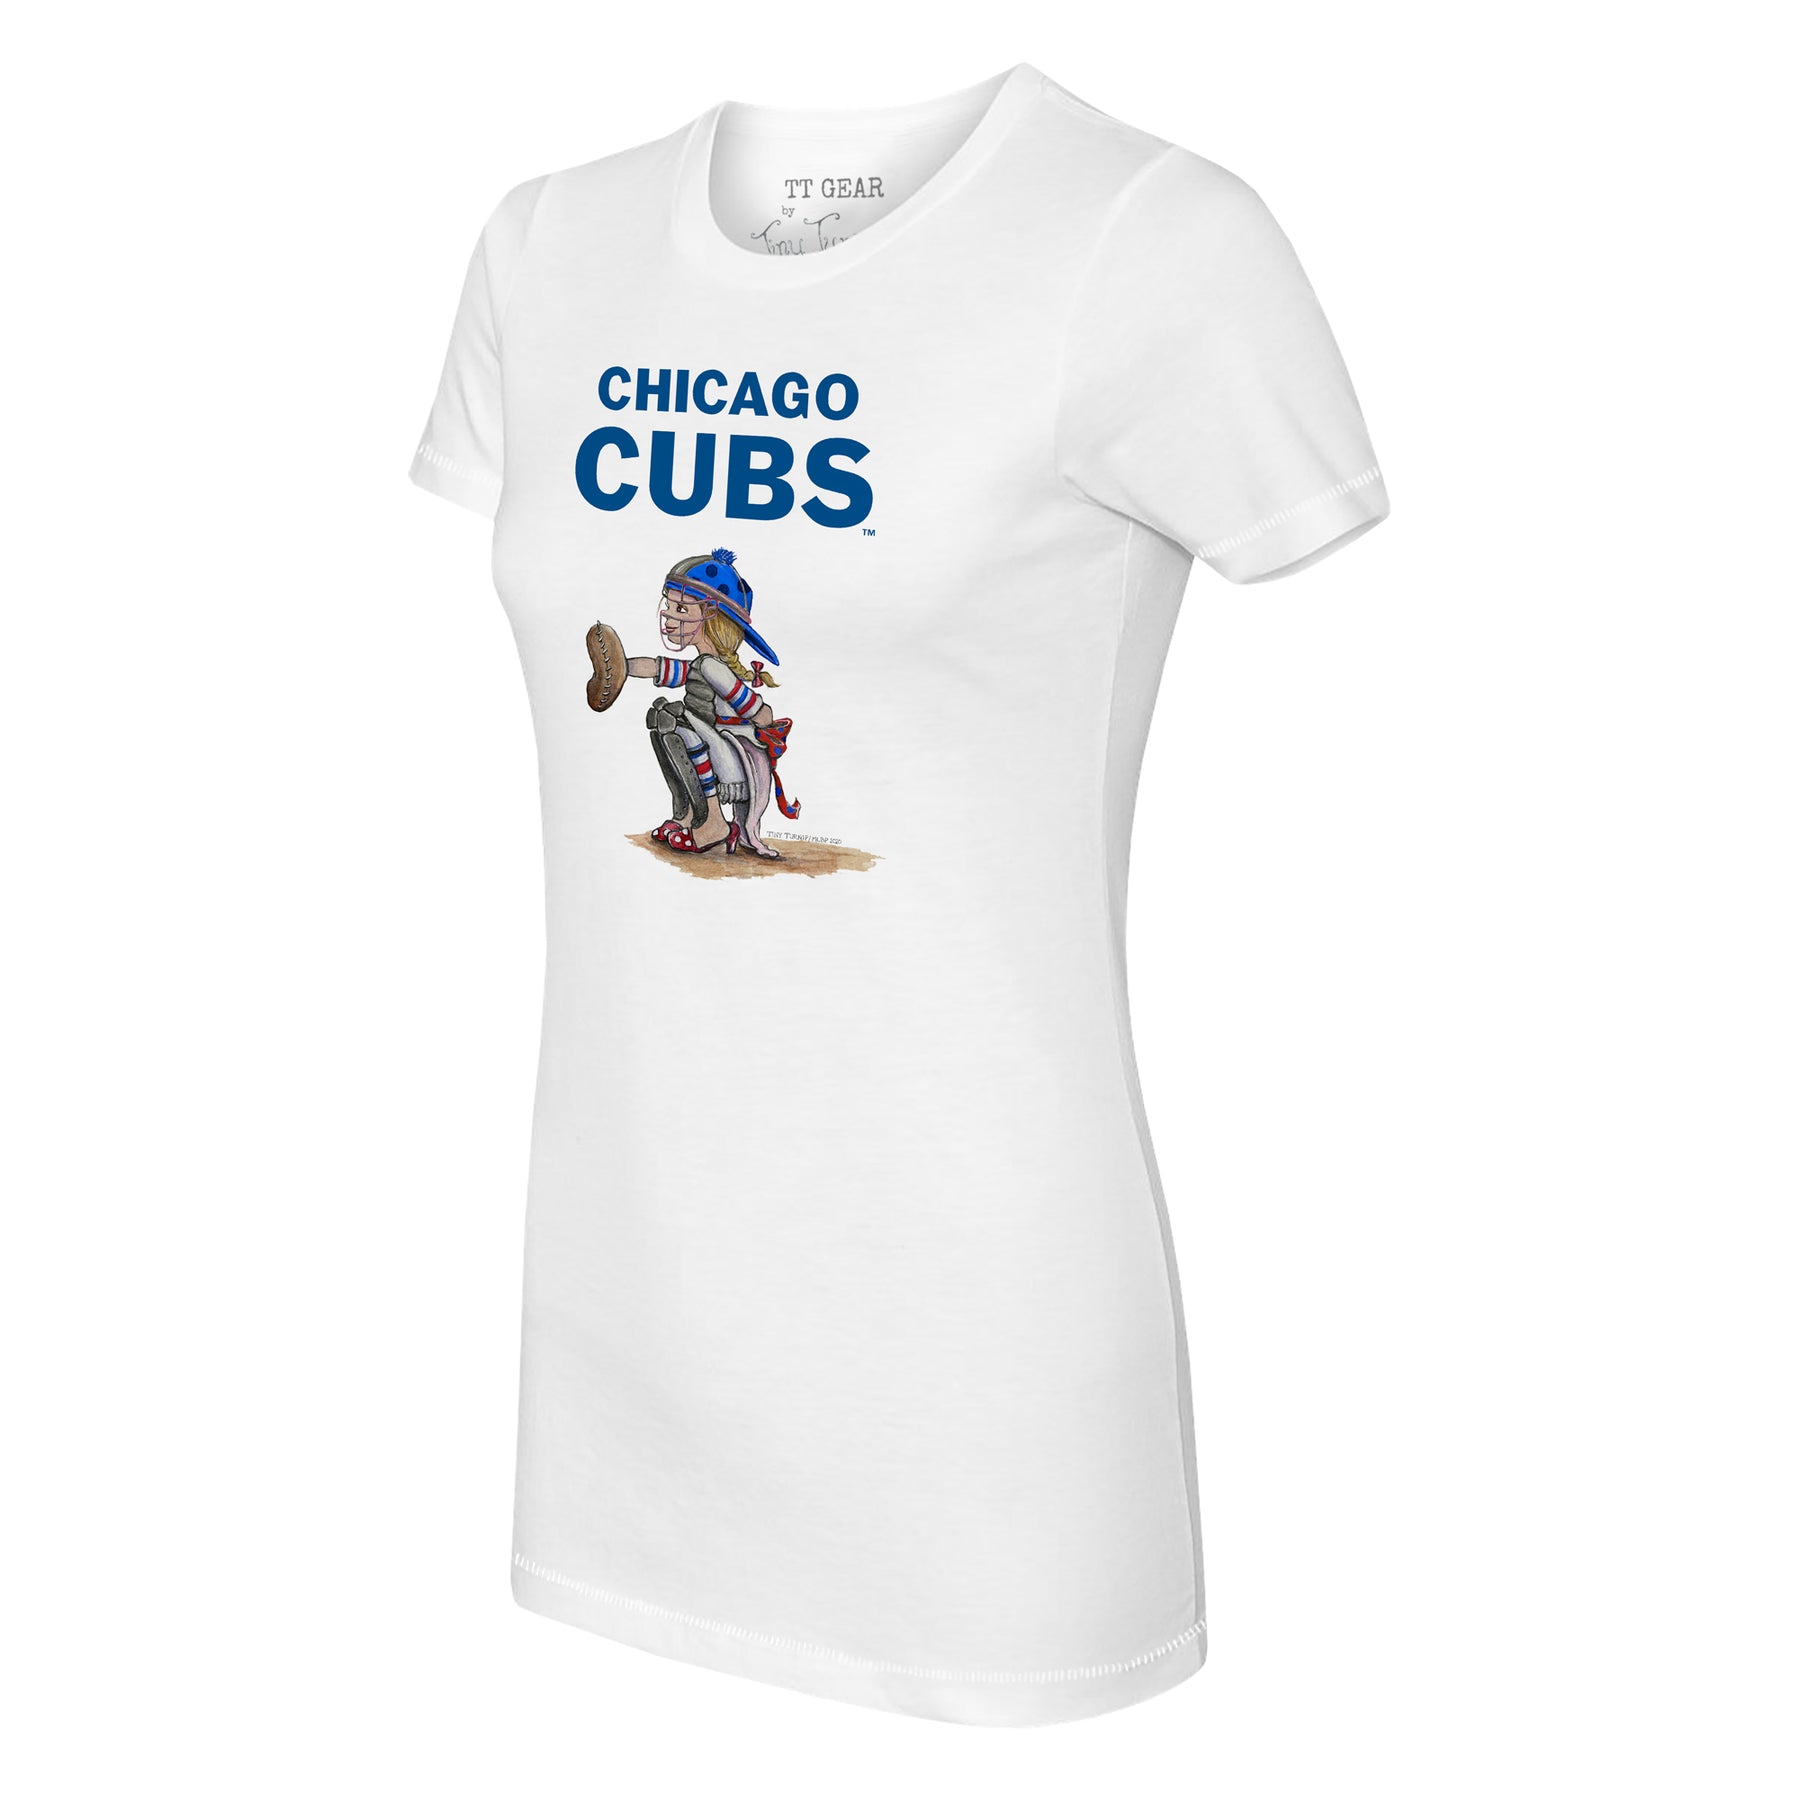 Chicago Cubs Kate The Catcher Tee Shirt Youth XL (12-14) / White